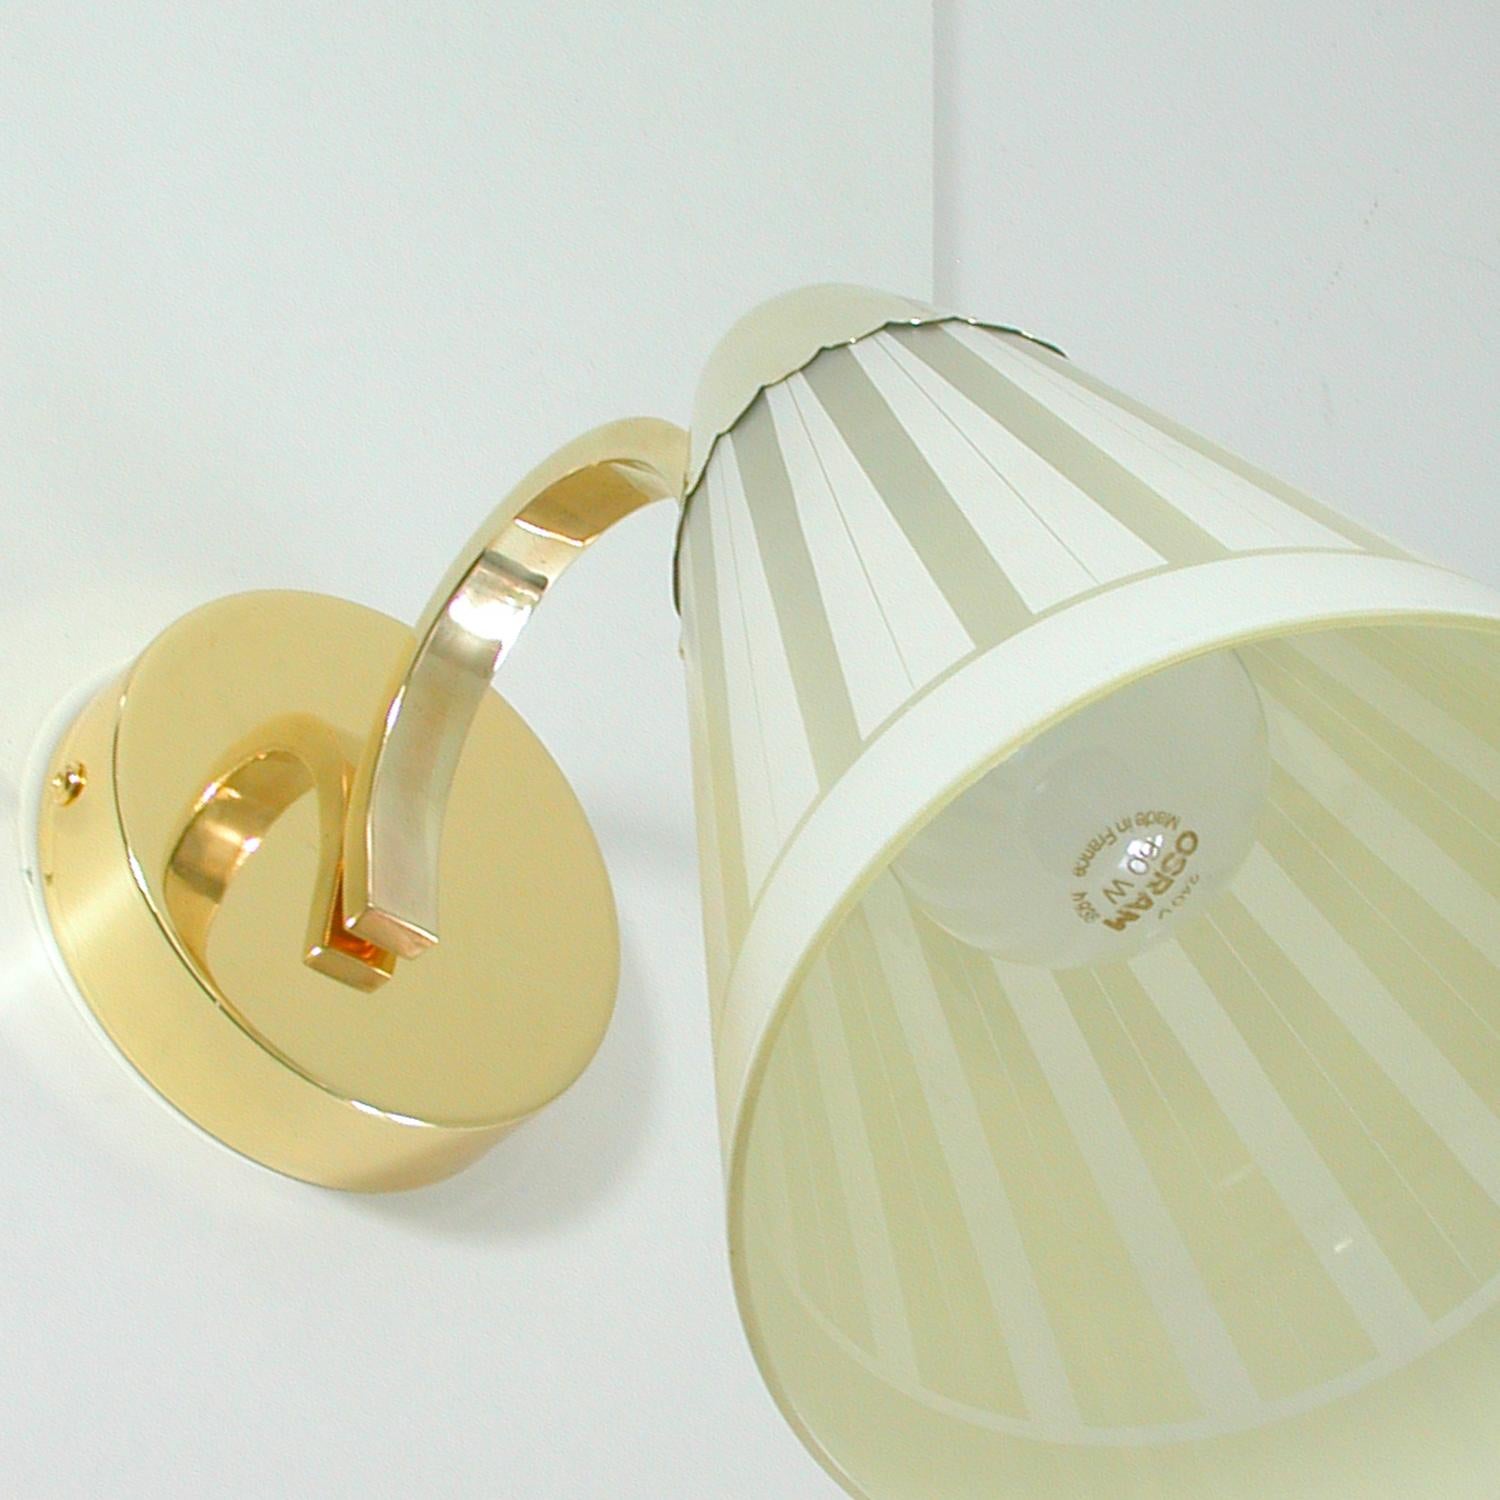 Midcentury German Brass and Glass Wall Light Sconce 1950s For Sale 1